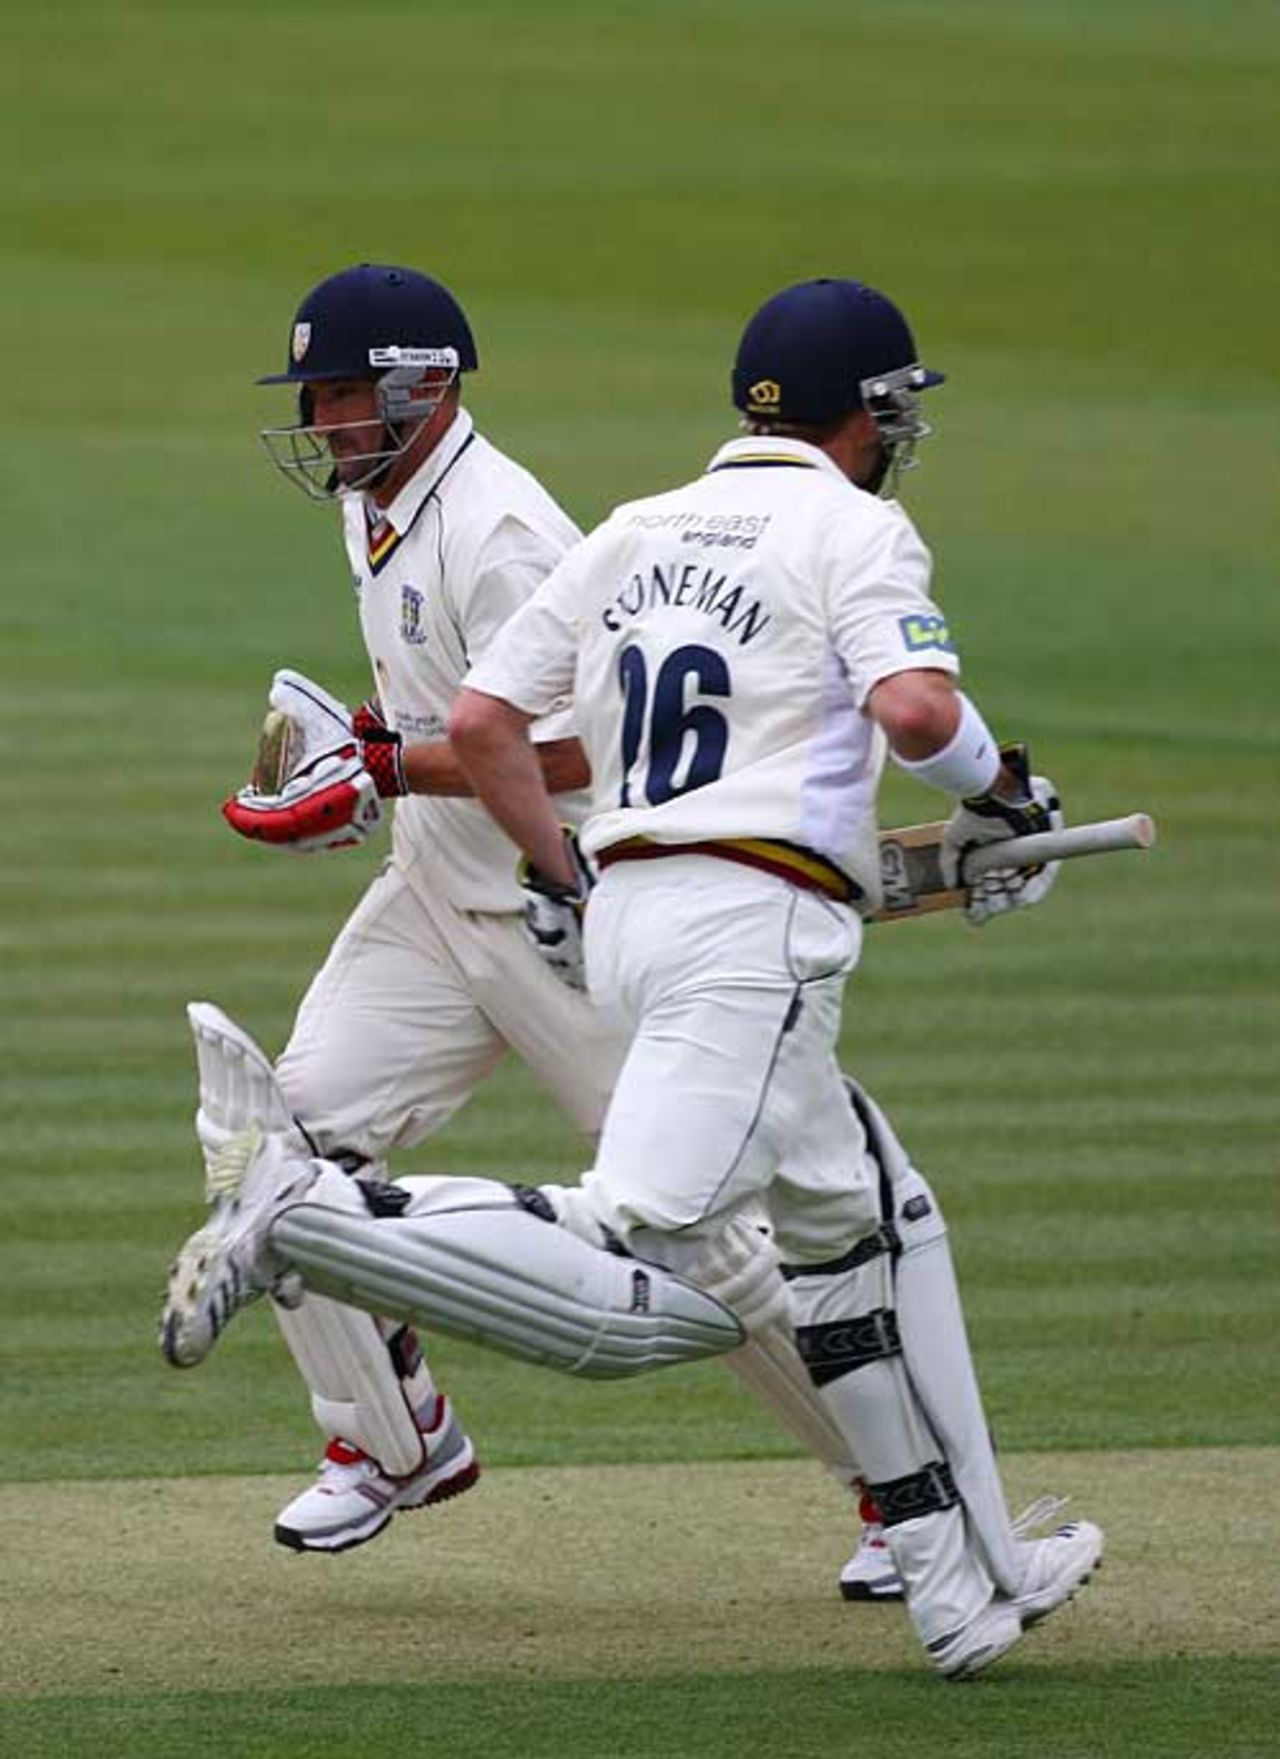 Michael Di Venuto and Mark Stoneman added 104 for the first wicket, MCC v Durham, Lord's, April 9, 2009